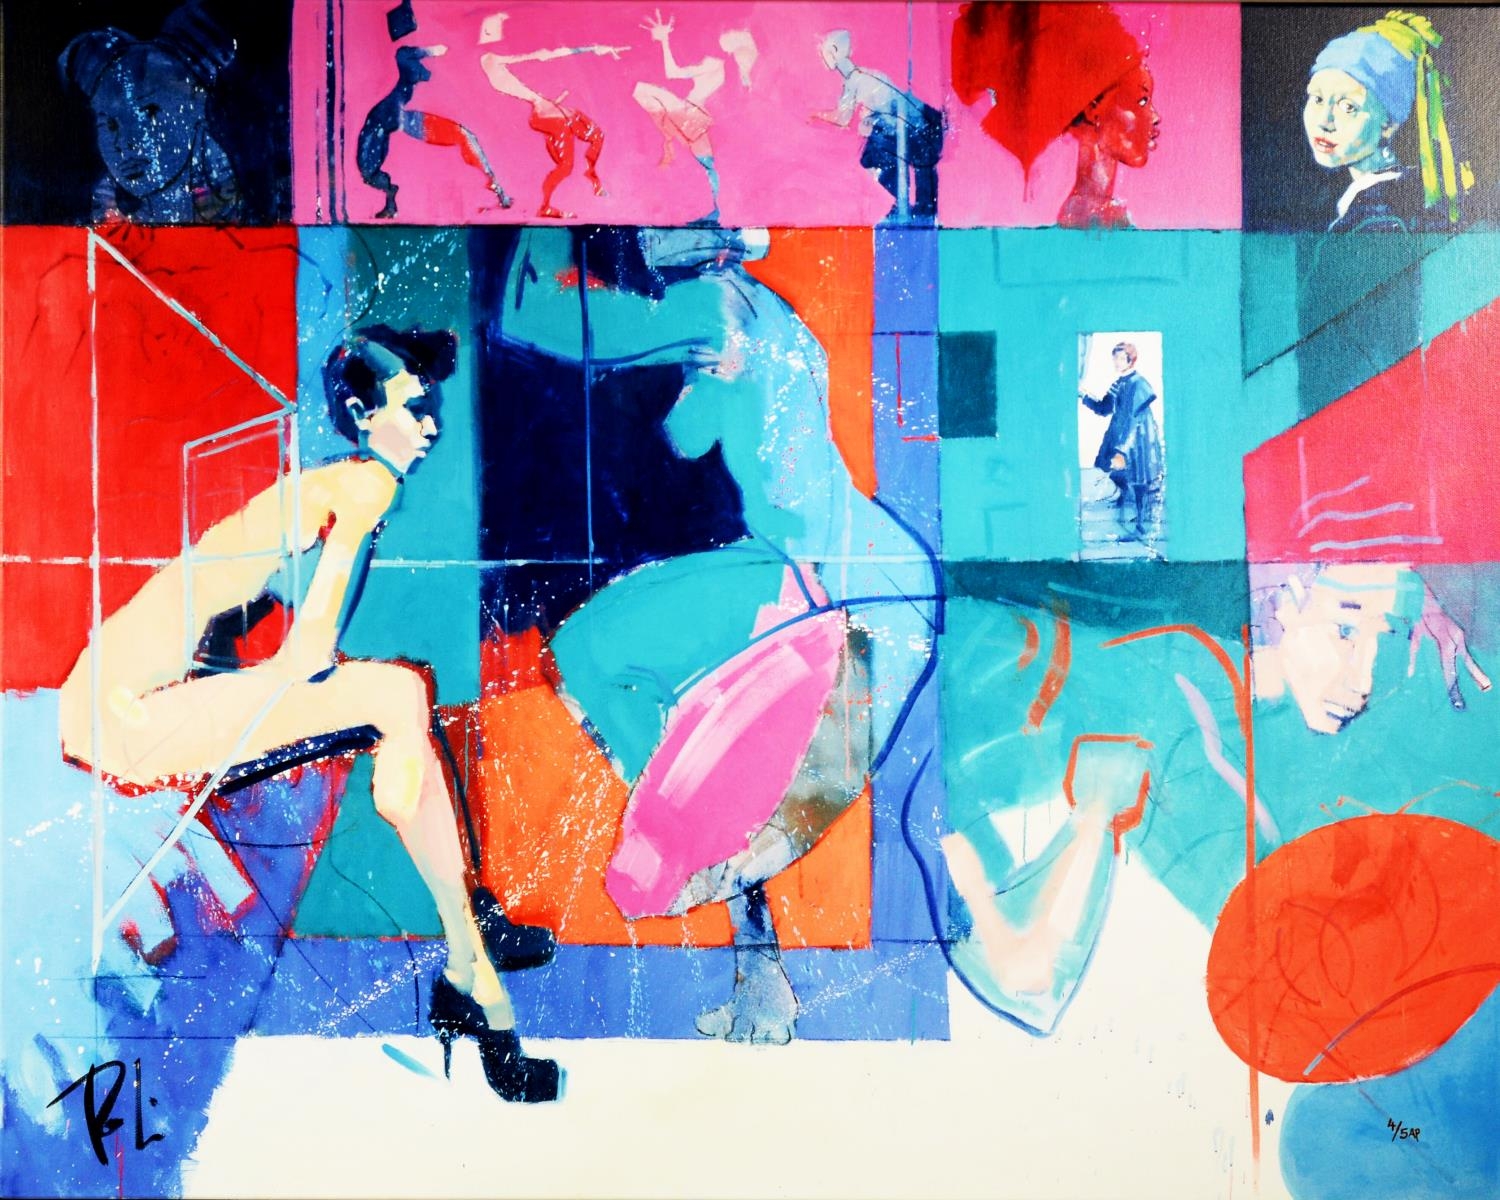 TOBY MULLIGAN (b.1969) SIGNED LIMITED EDITION ARTIST PROOF COLOUR PRINT ON CANVAS ‘Provocative